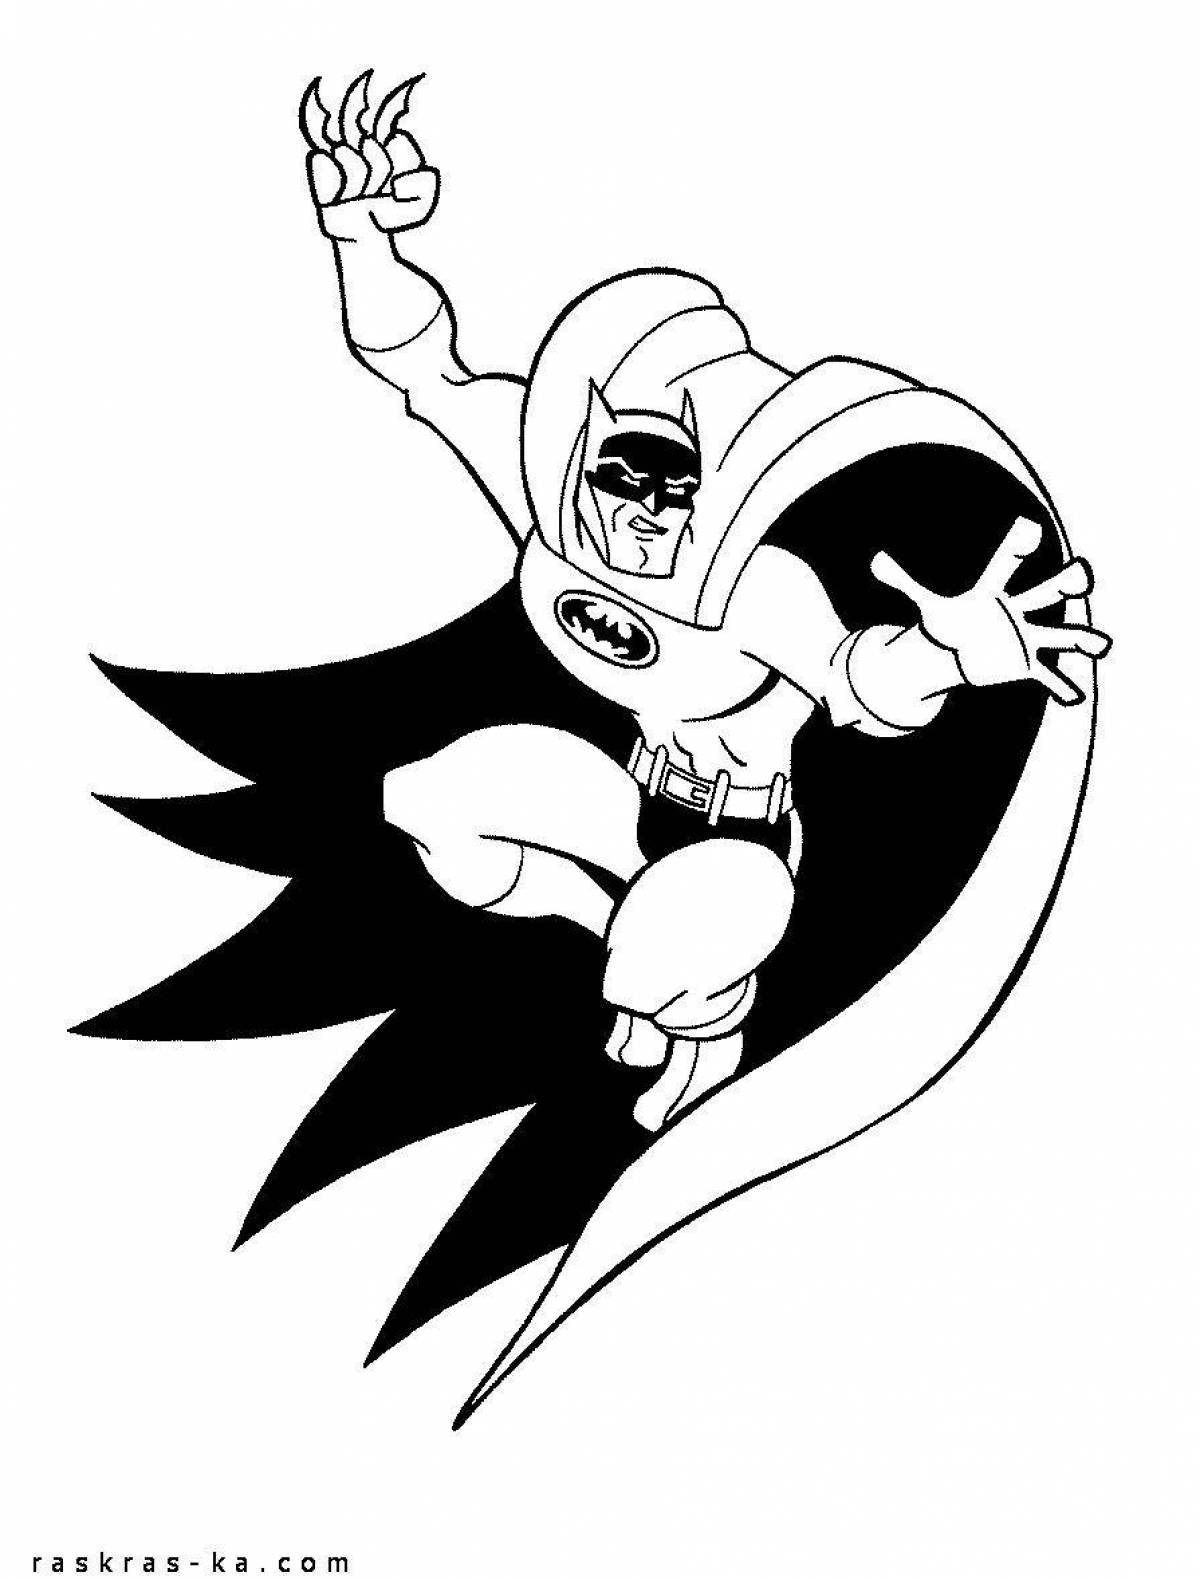 Fascinating batman coloring book for mobile devices